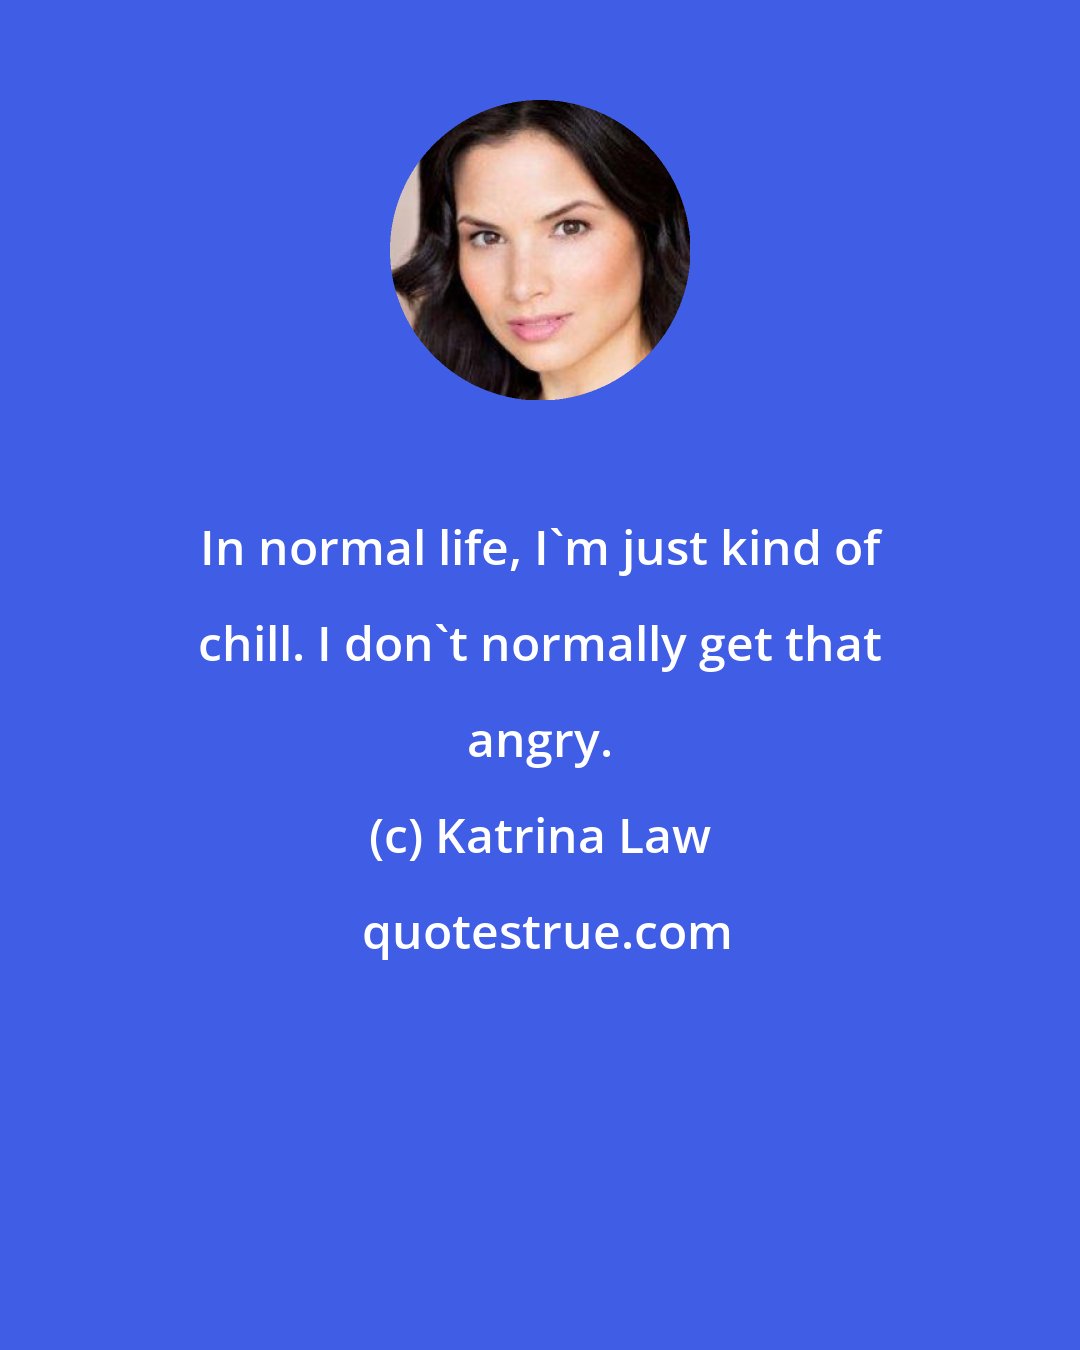 Katrina Law: In normal life, I'm just kind of chill. I don't normally get that angry.